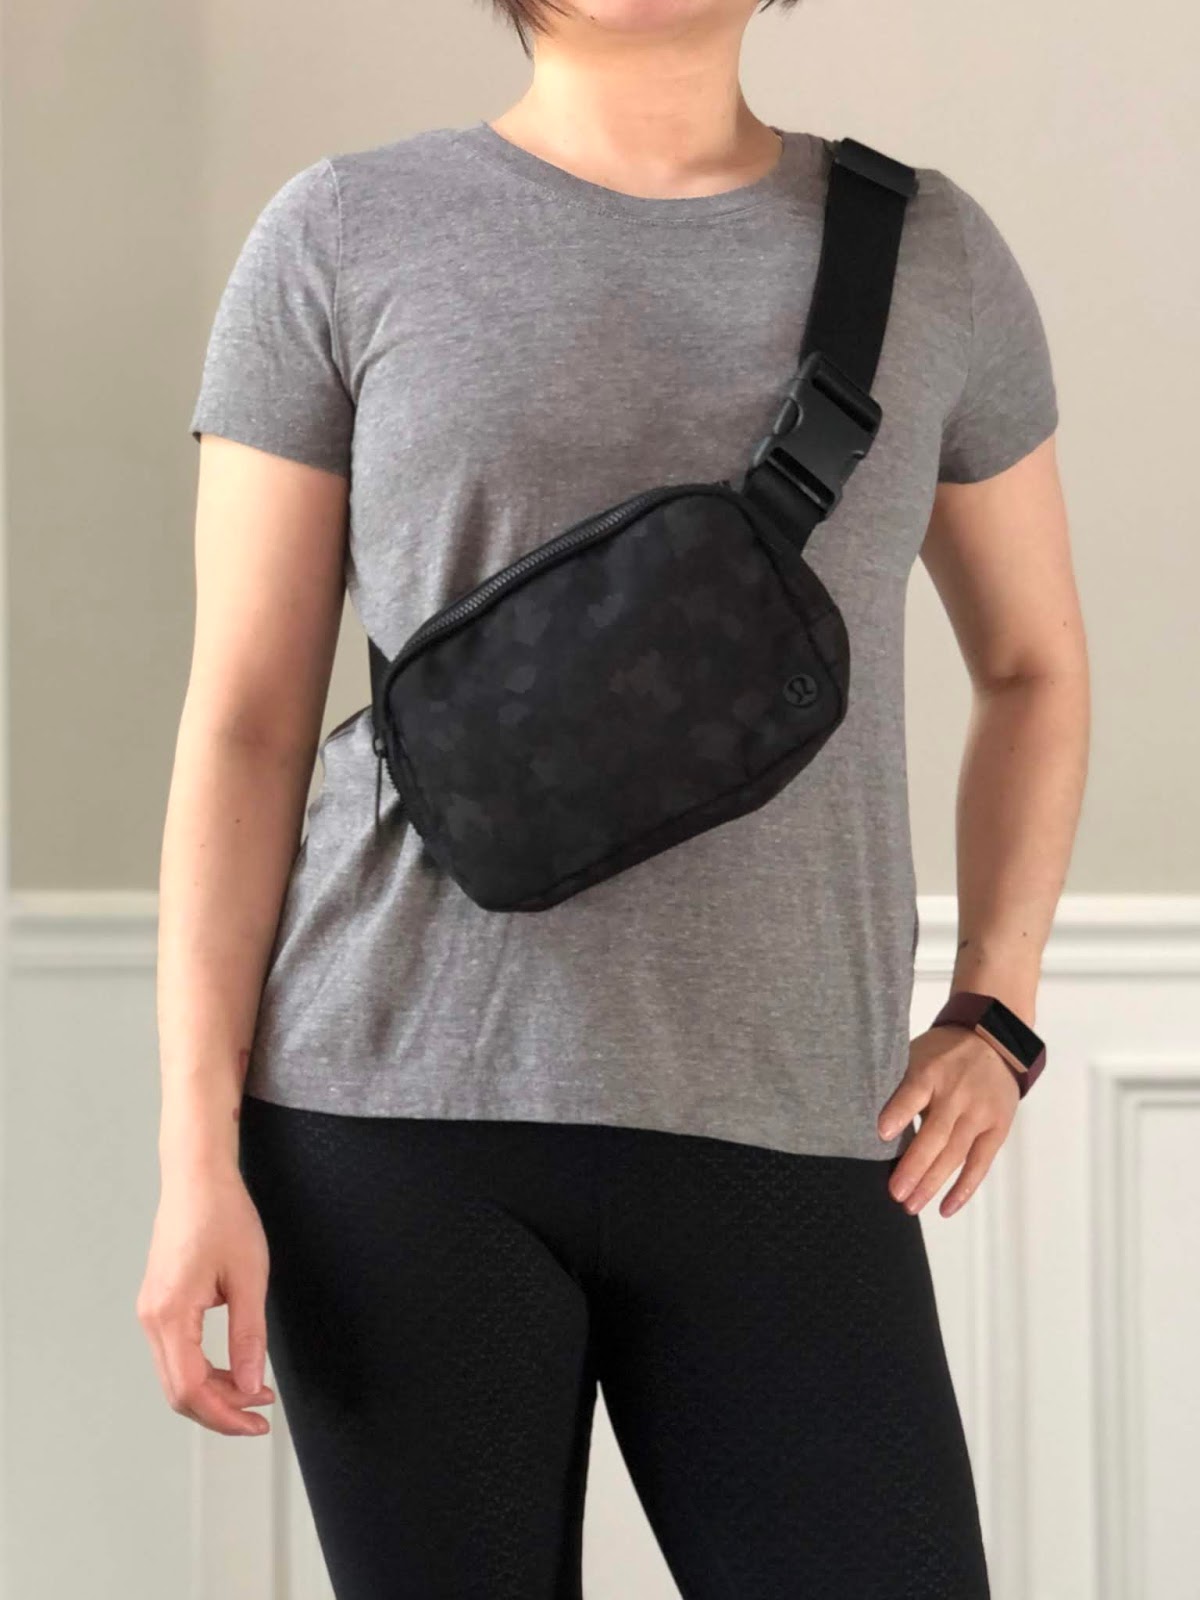 how much does a lululemon belt bag cost today